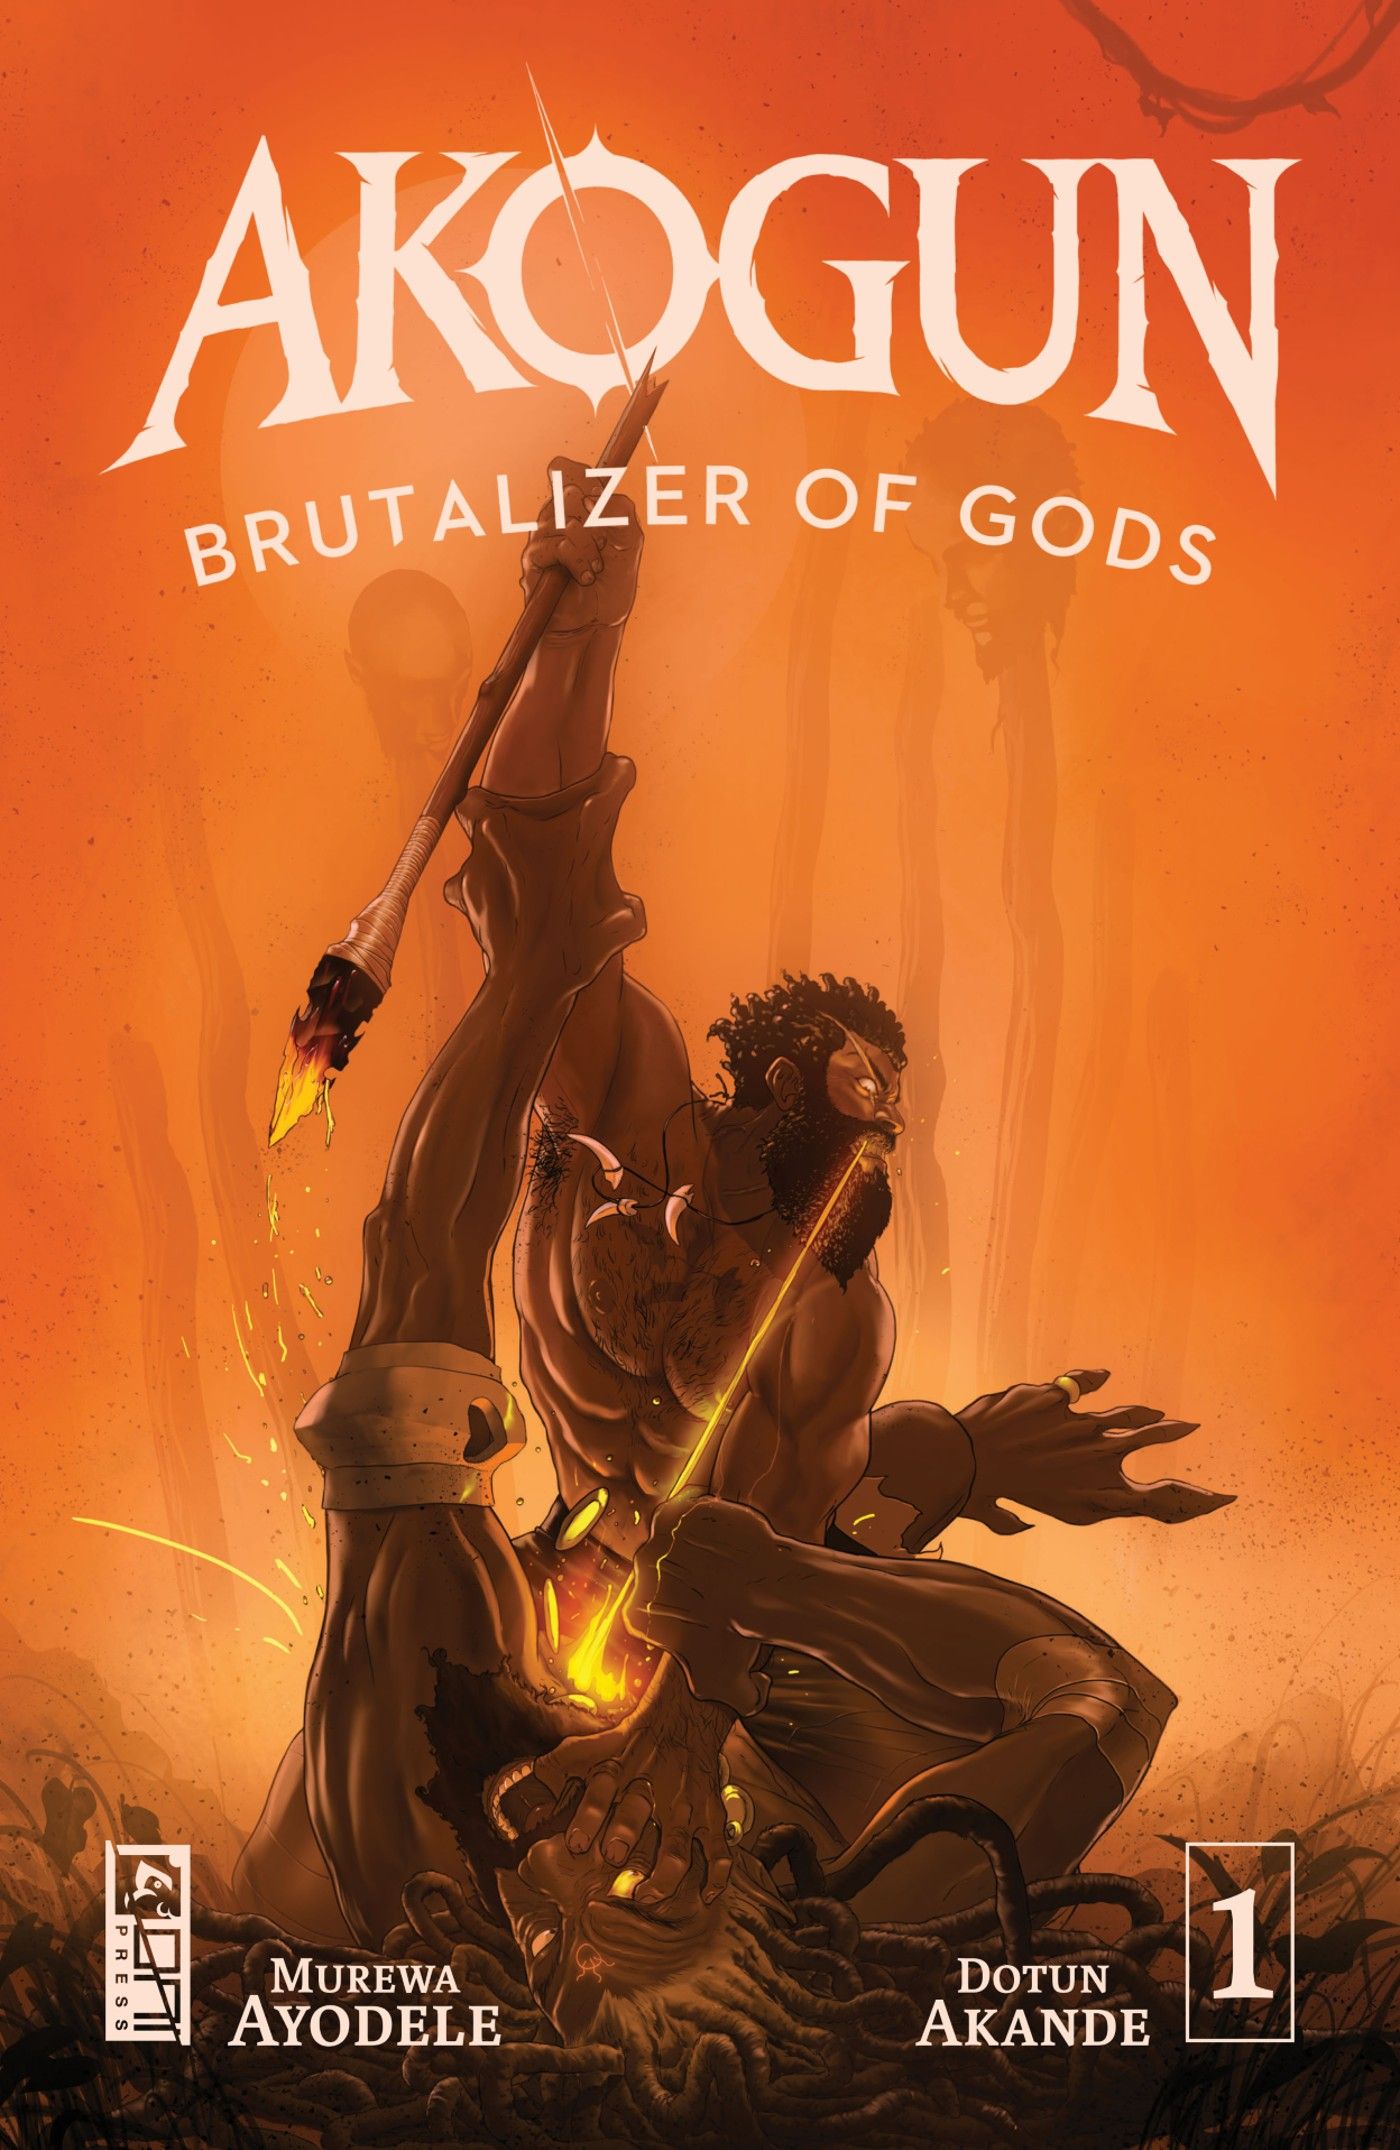 A New African Fantasy Launches in AKOGUN: BRUTALIZER OF GODS (Exclusive)